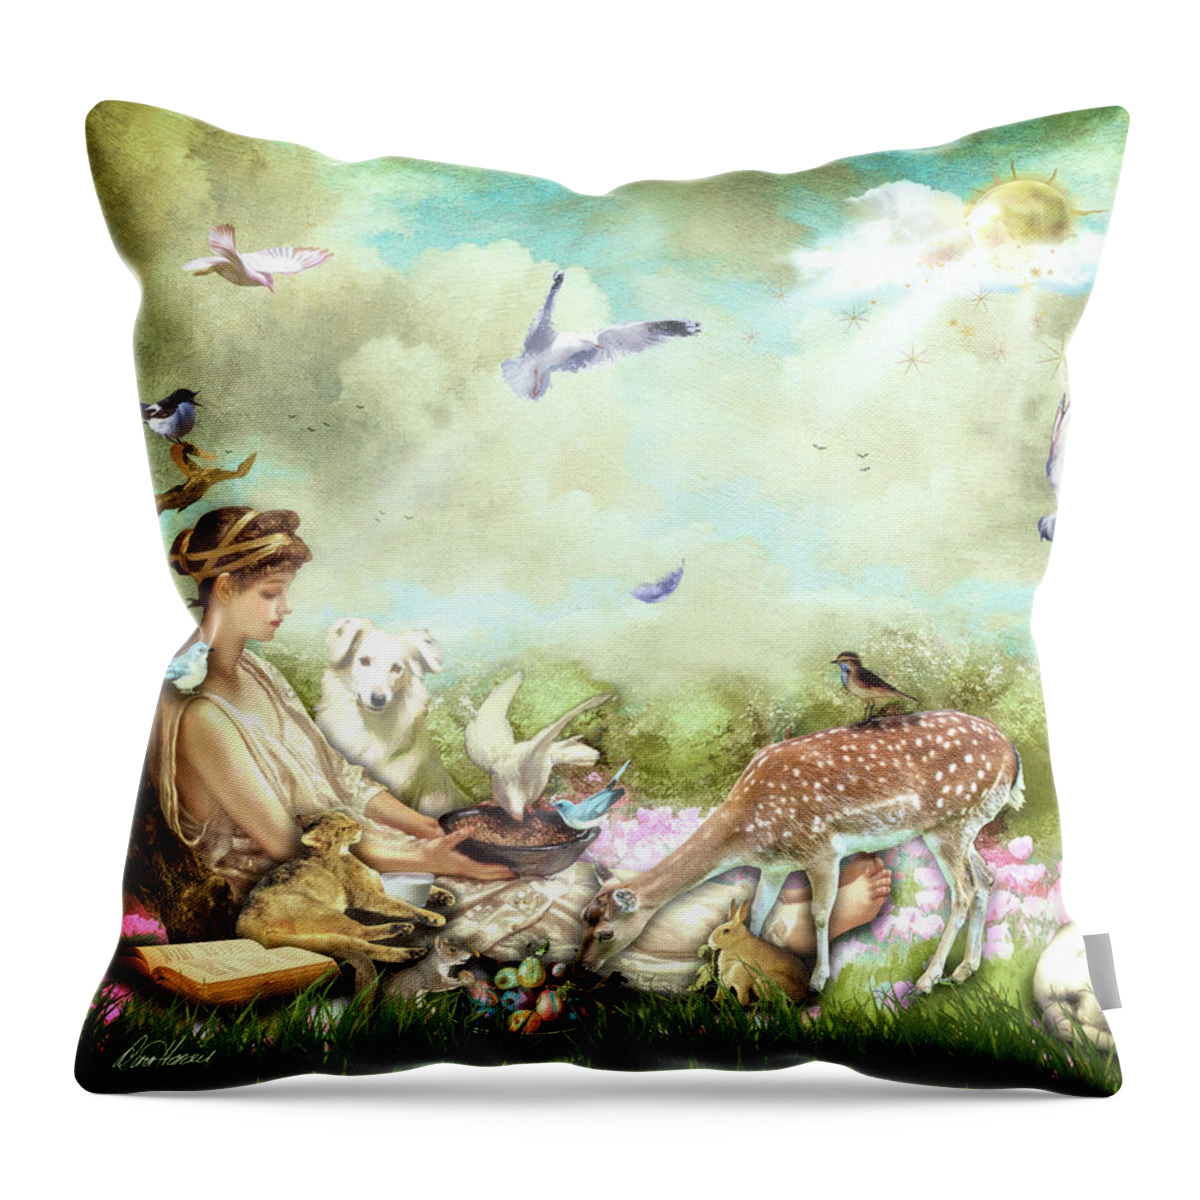 Kindness Throw Pillow featuring the digital art Kindness by Diana Haronis